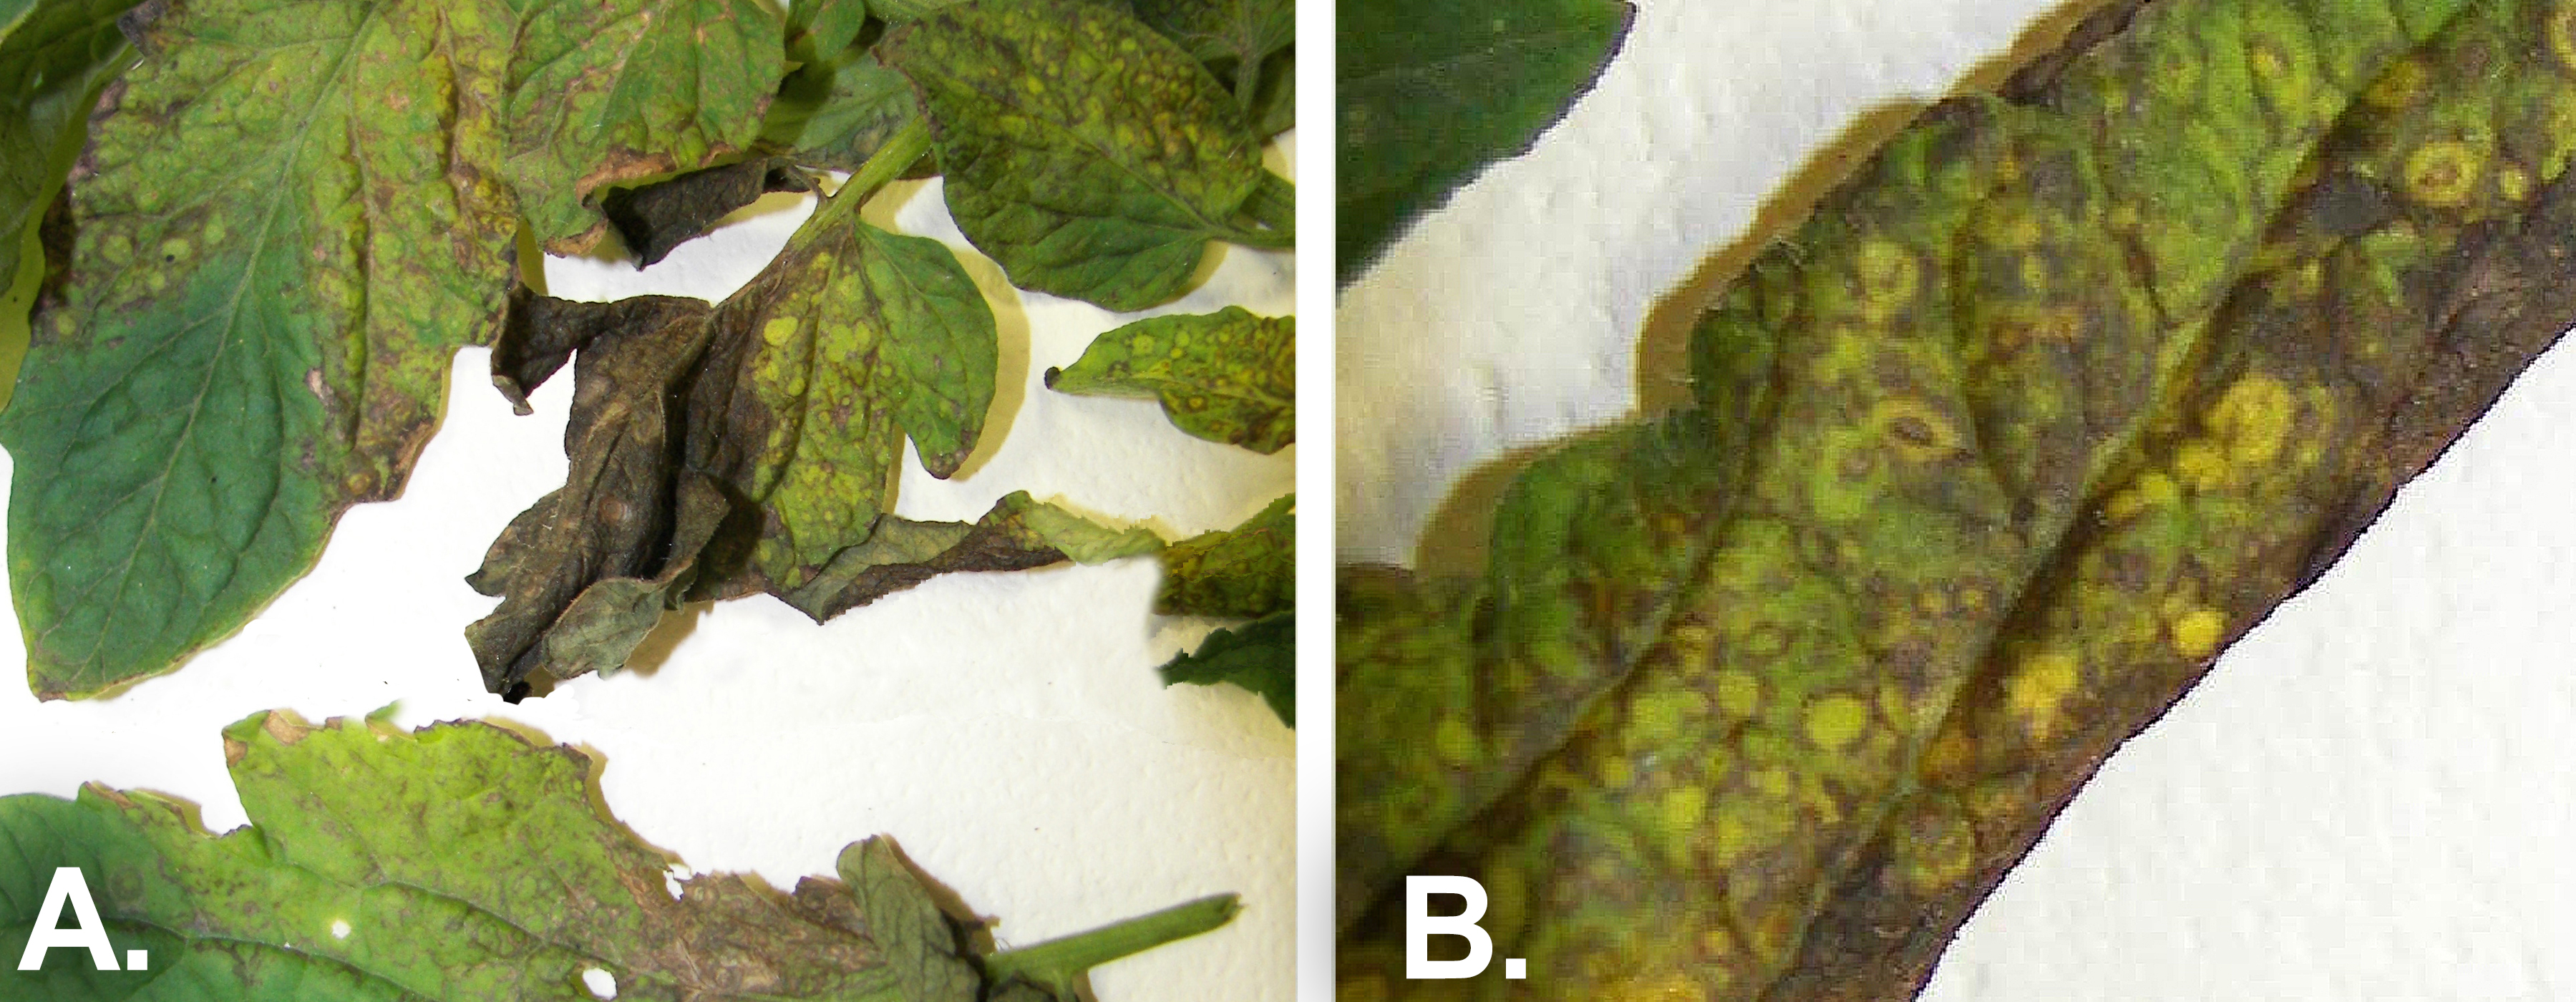 Two side-by-side pictures of tomato spotted wilt virus symptoms on leaves. The left one is labeled A. The right is labeled B.